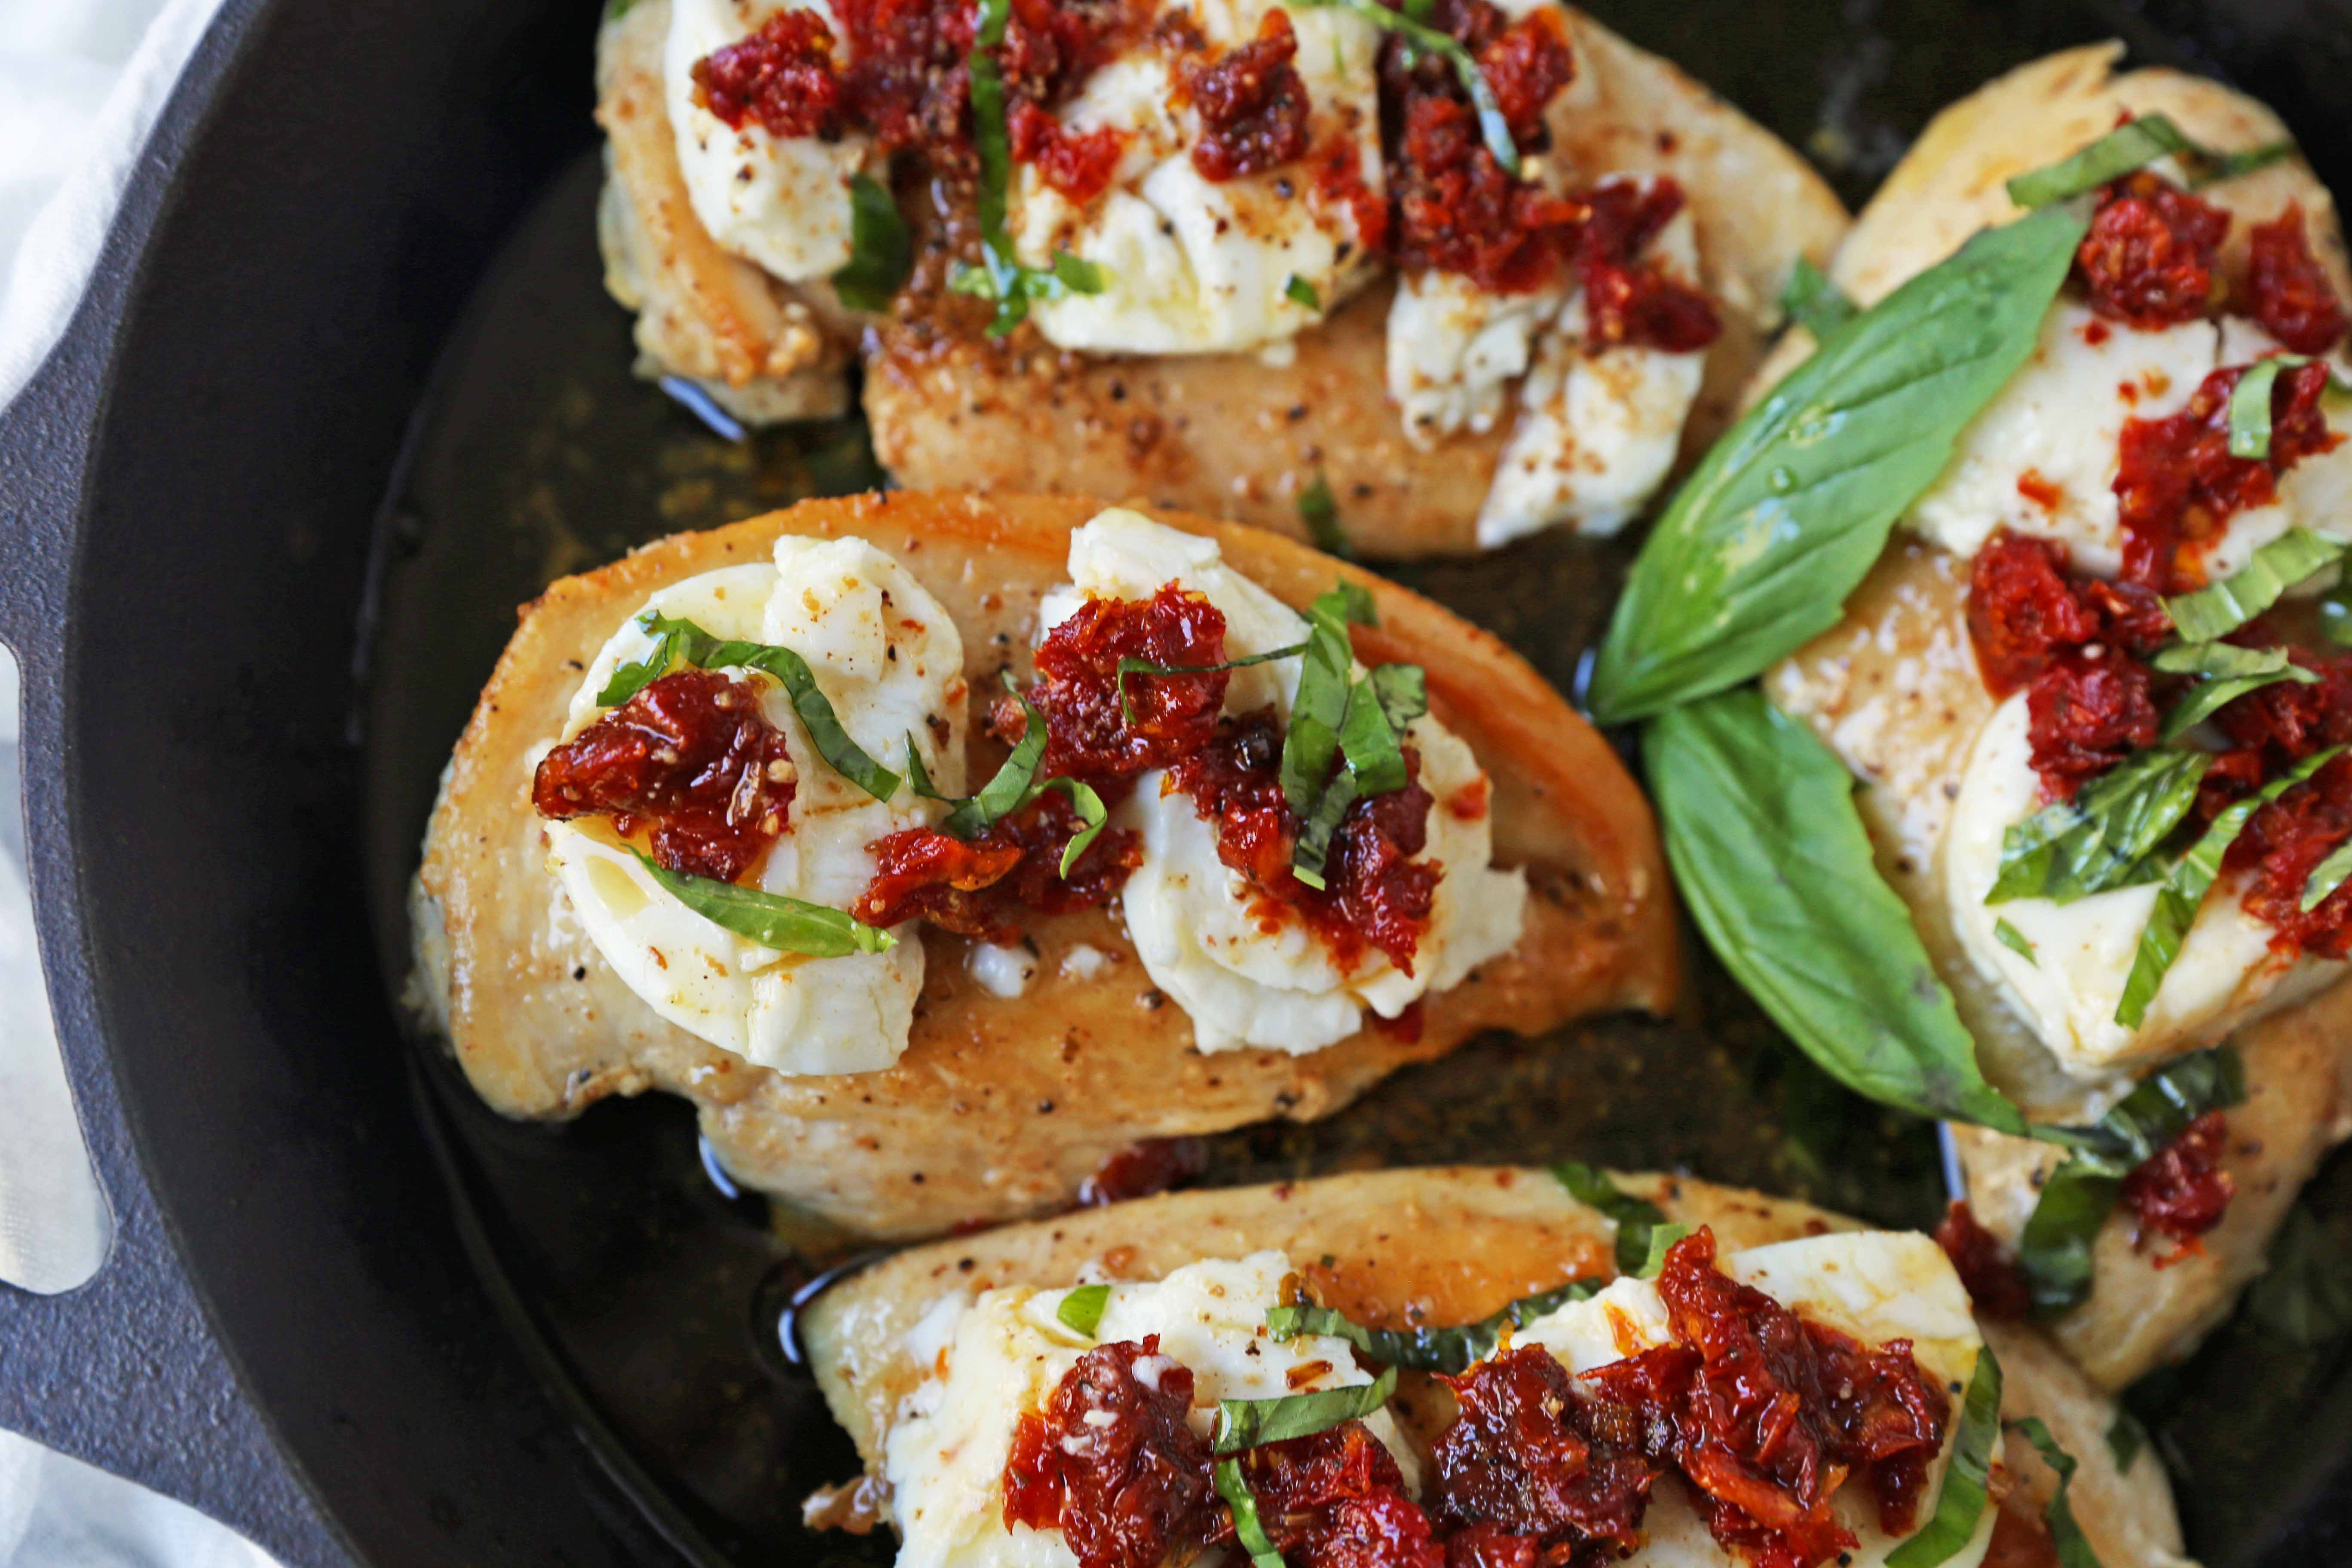 Chicken Bryan. Grilled chicken with a basil lemon butter sauce topped with sundried tomatoes and creamy goat cheese. A Carrabba's favorite! www.modernhoney.com #chickenbryan #carrabbas #chicken